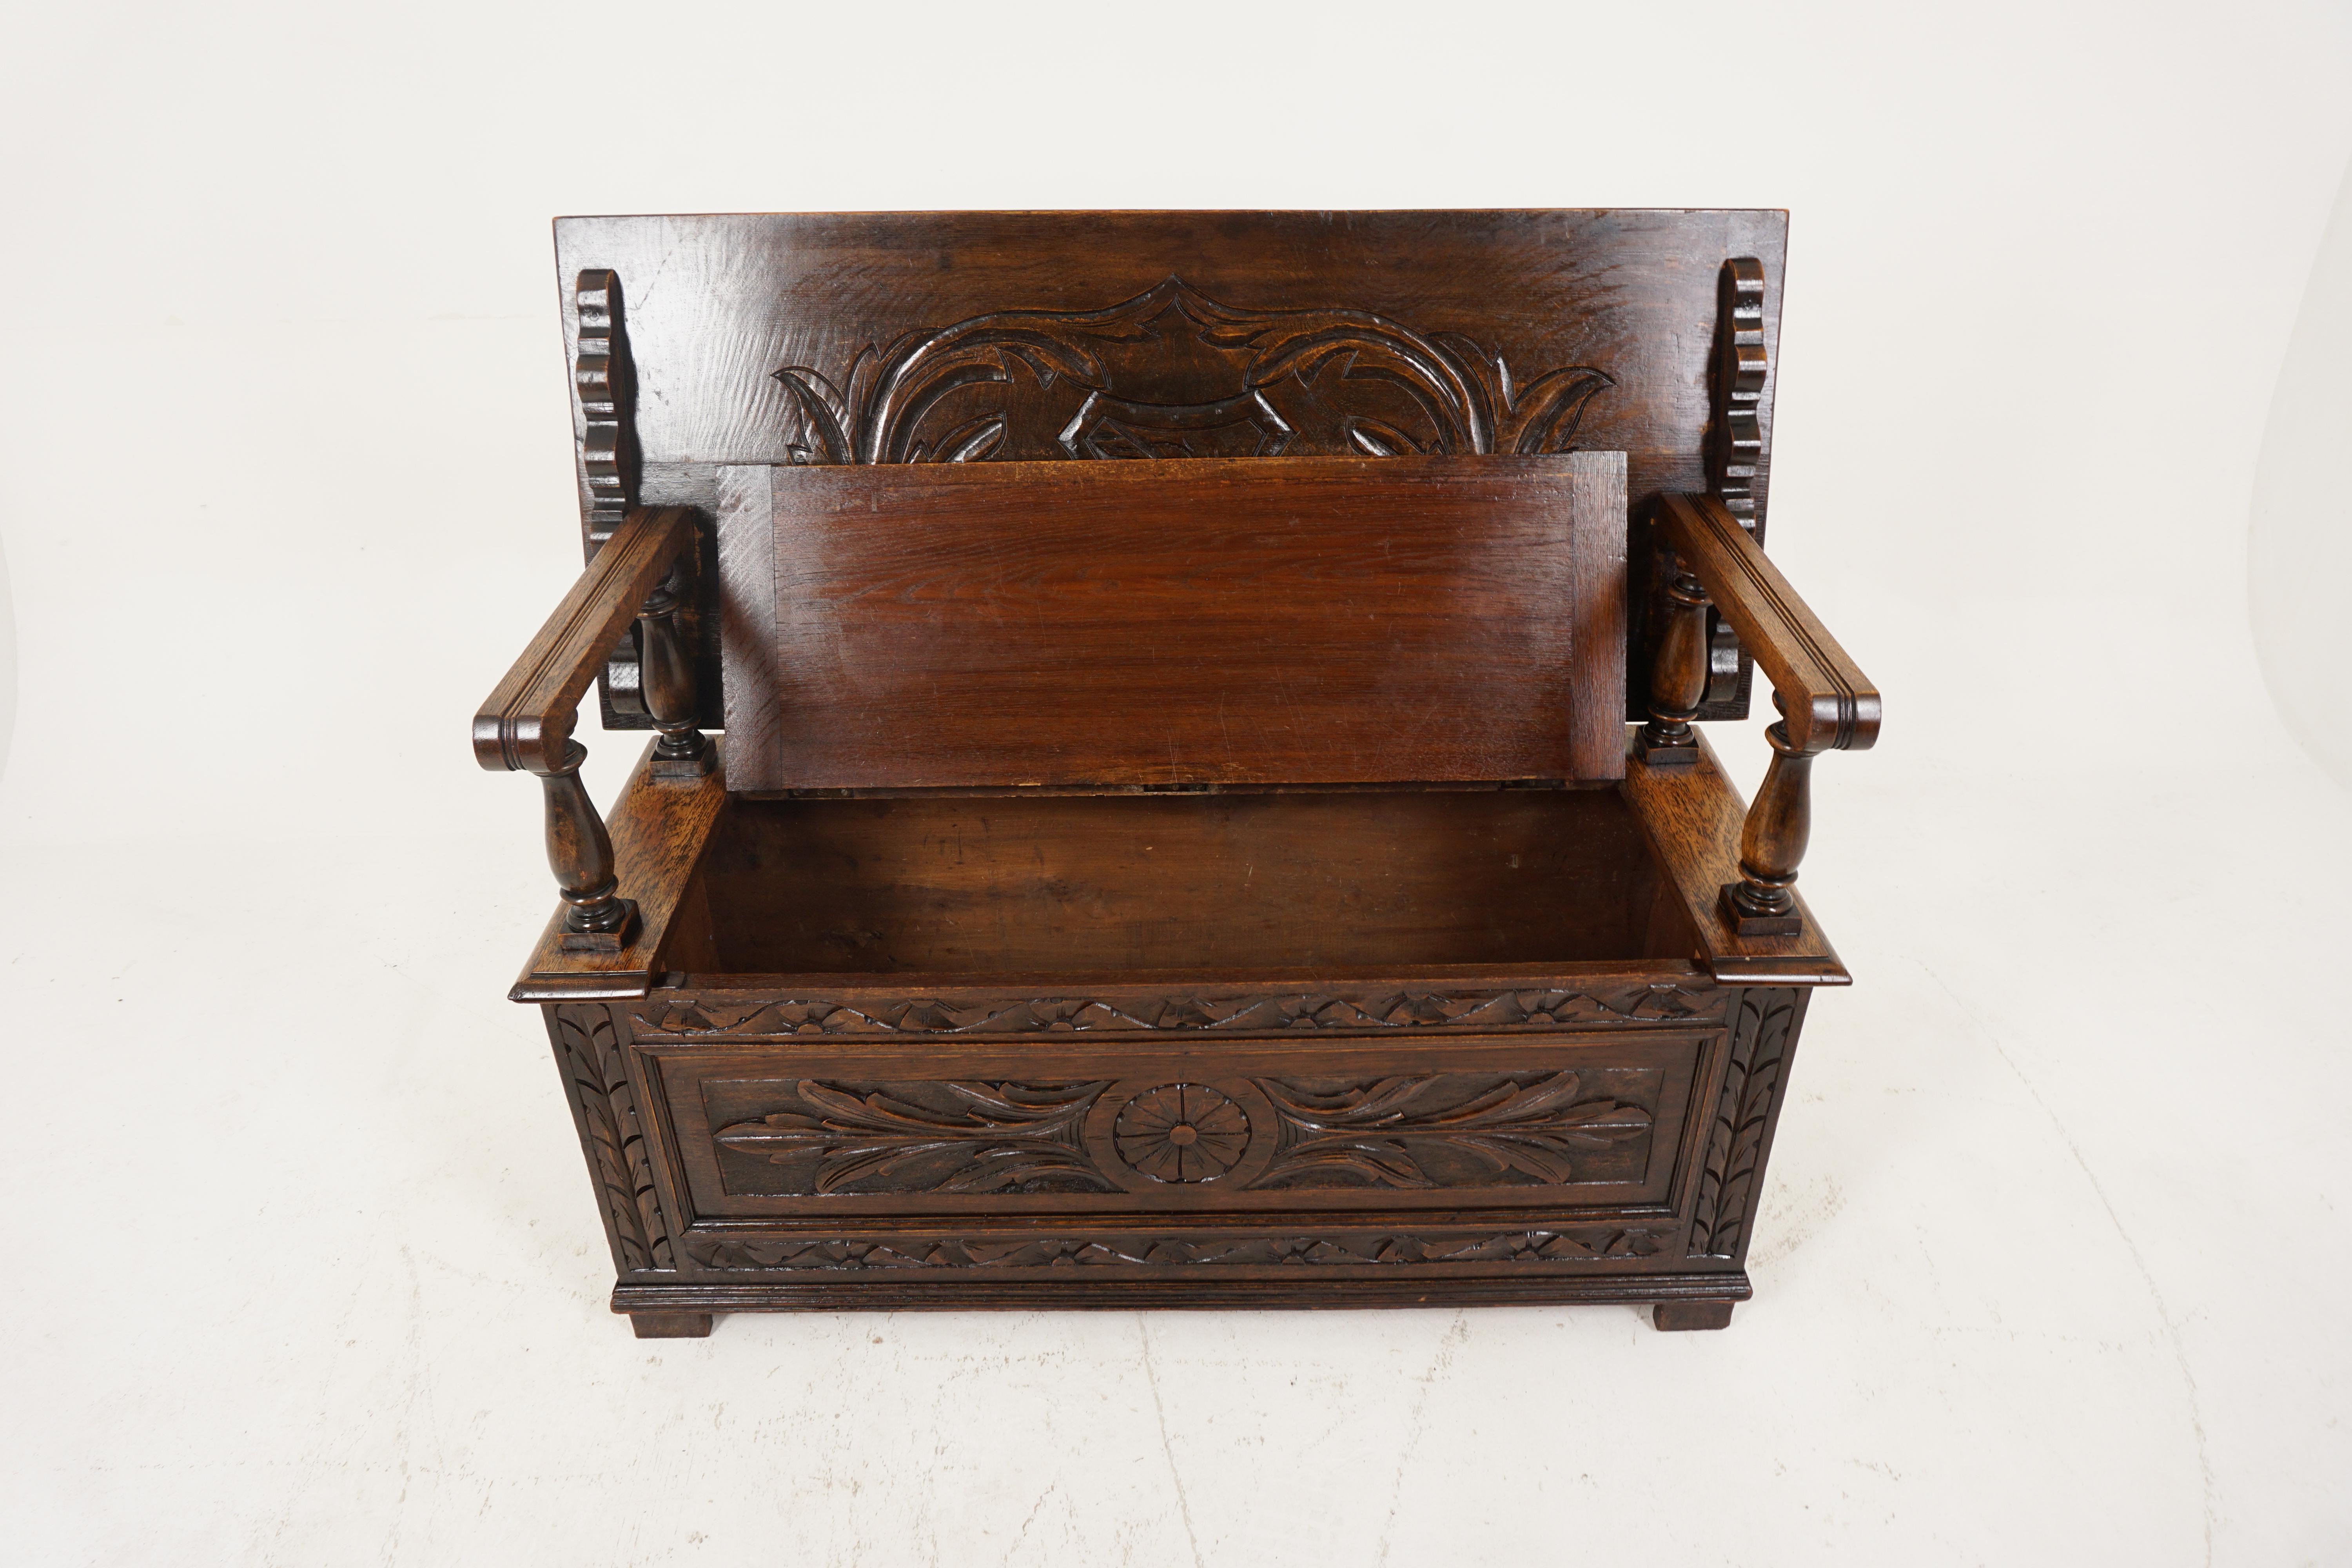 Antique carved oak Monks bench, settee, hall bench, Scotland 1880, B2679

Scotland 18980
Solid oak
Original finish
Rectangular top with carved detail and carved edge
Top lifts to form a bench
The back has carved detail
Arm rests have turned